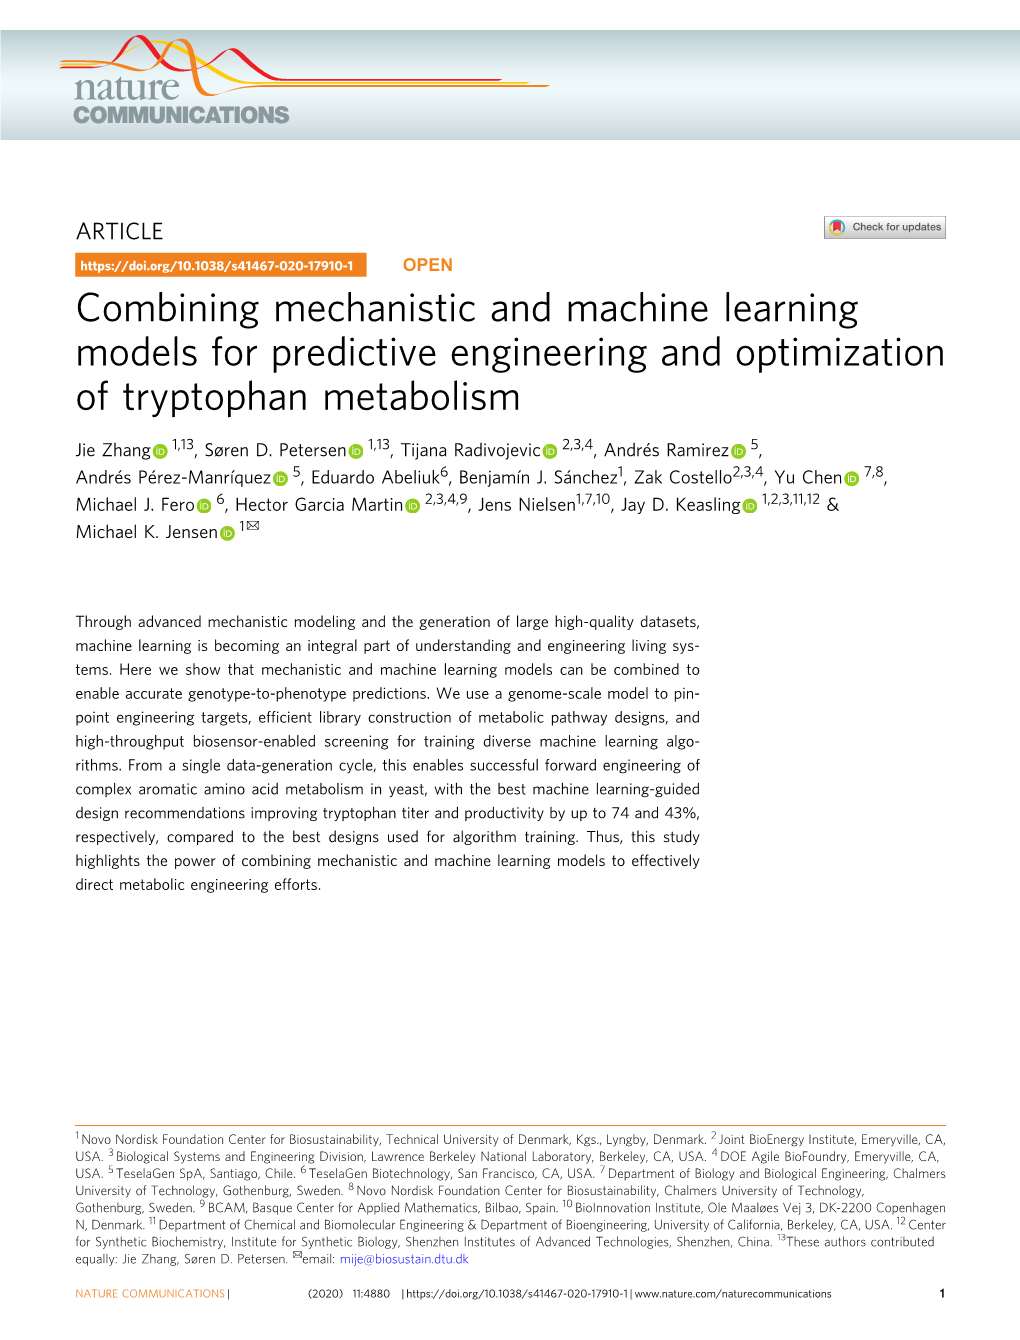 Combining Mechanistic and Machine Learning Models for Predictive Engineering and Optimization of Tryptophan Metabolism